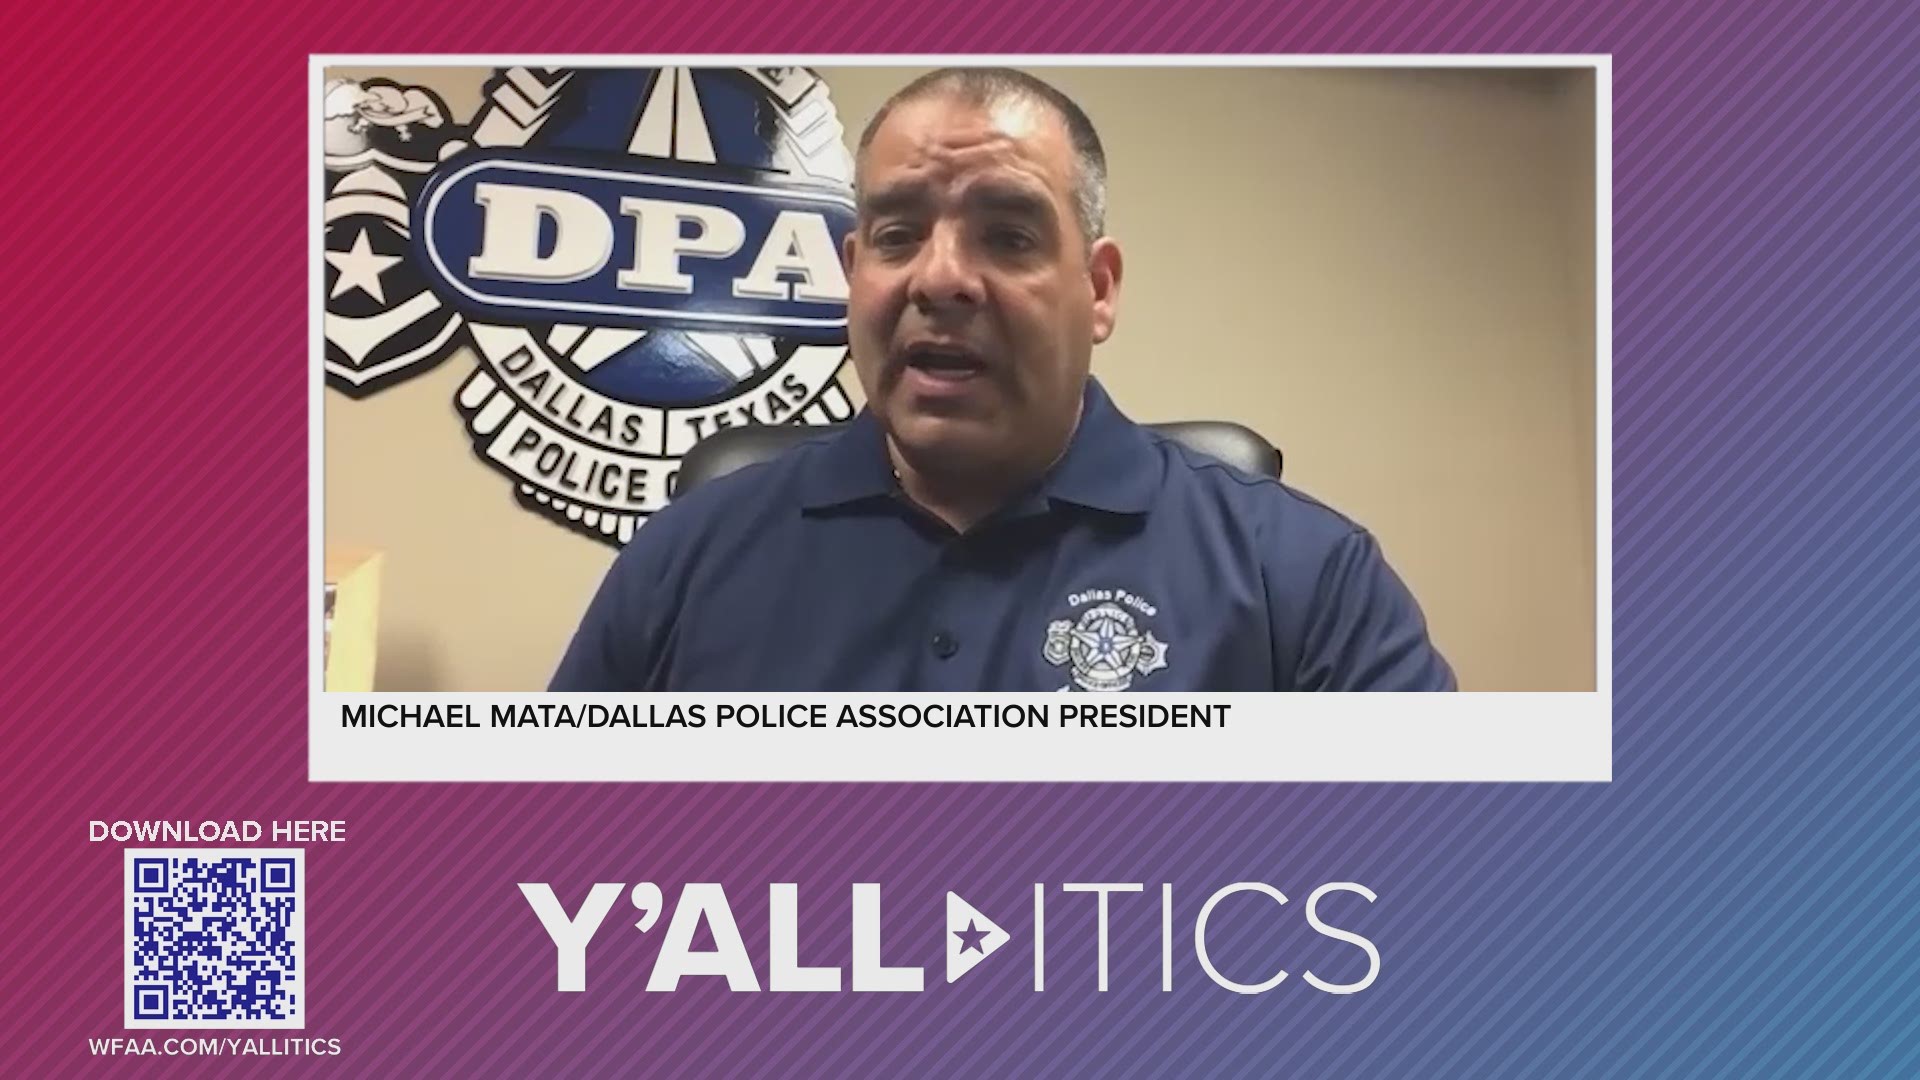 Michael Mata, the Dallas Police Association president, joined Y'all-itics to talk about Texas permitless carry bill.